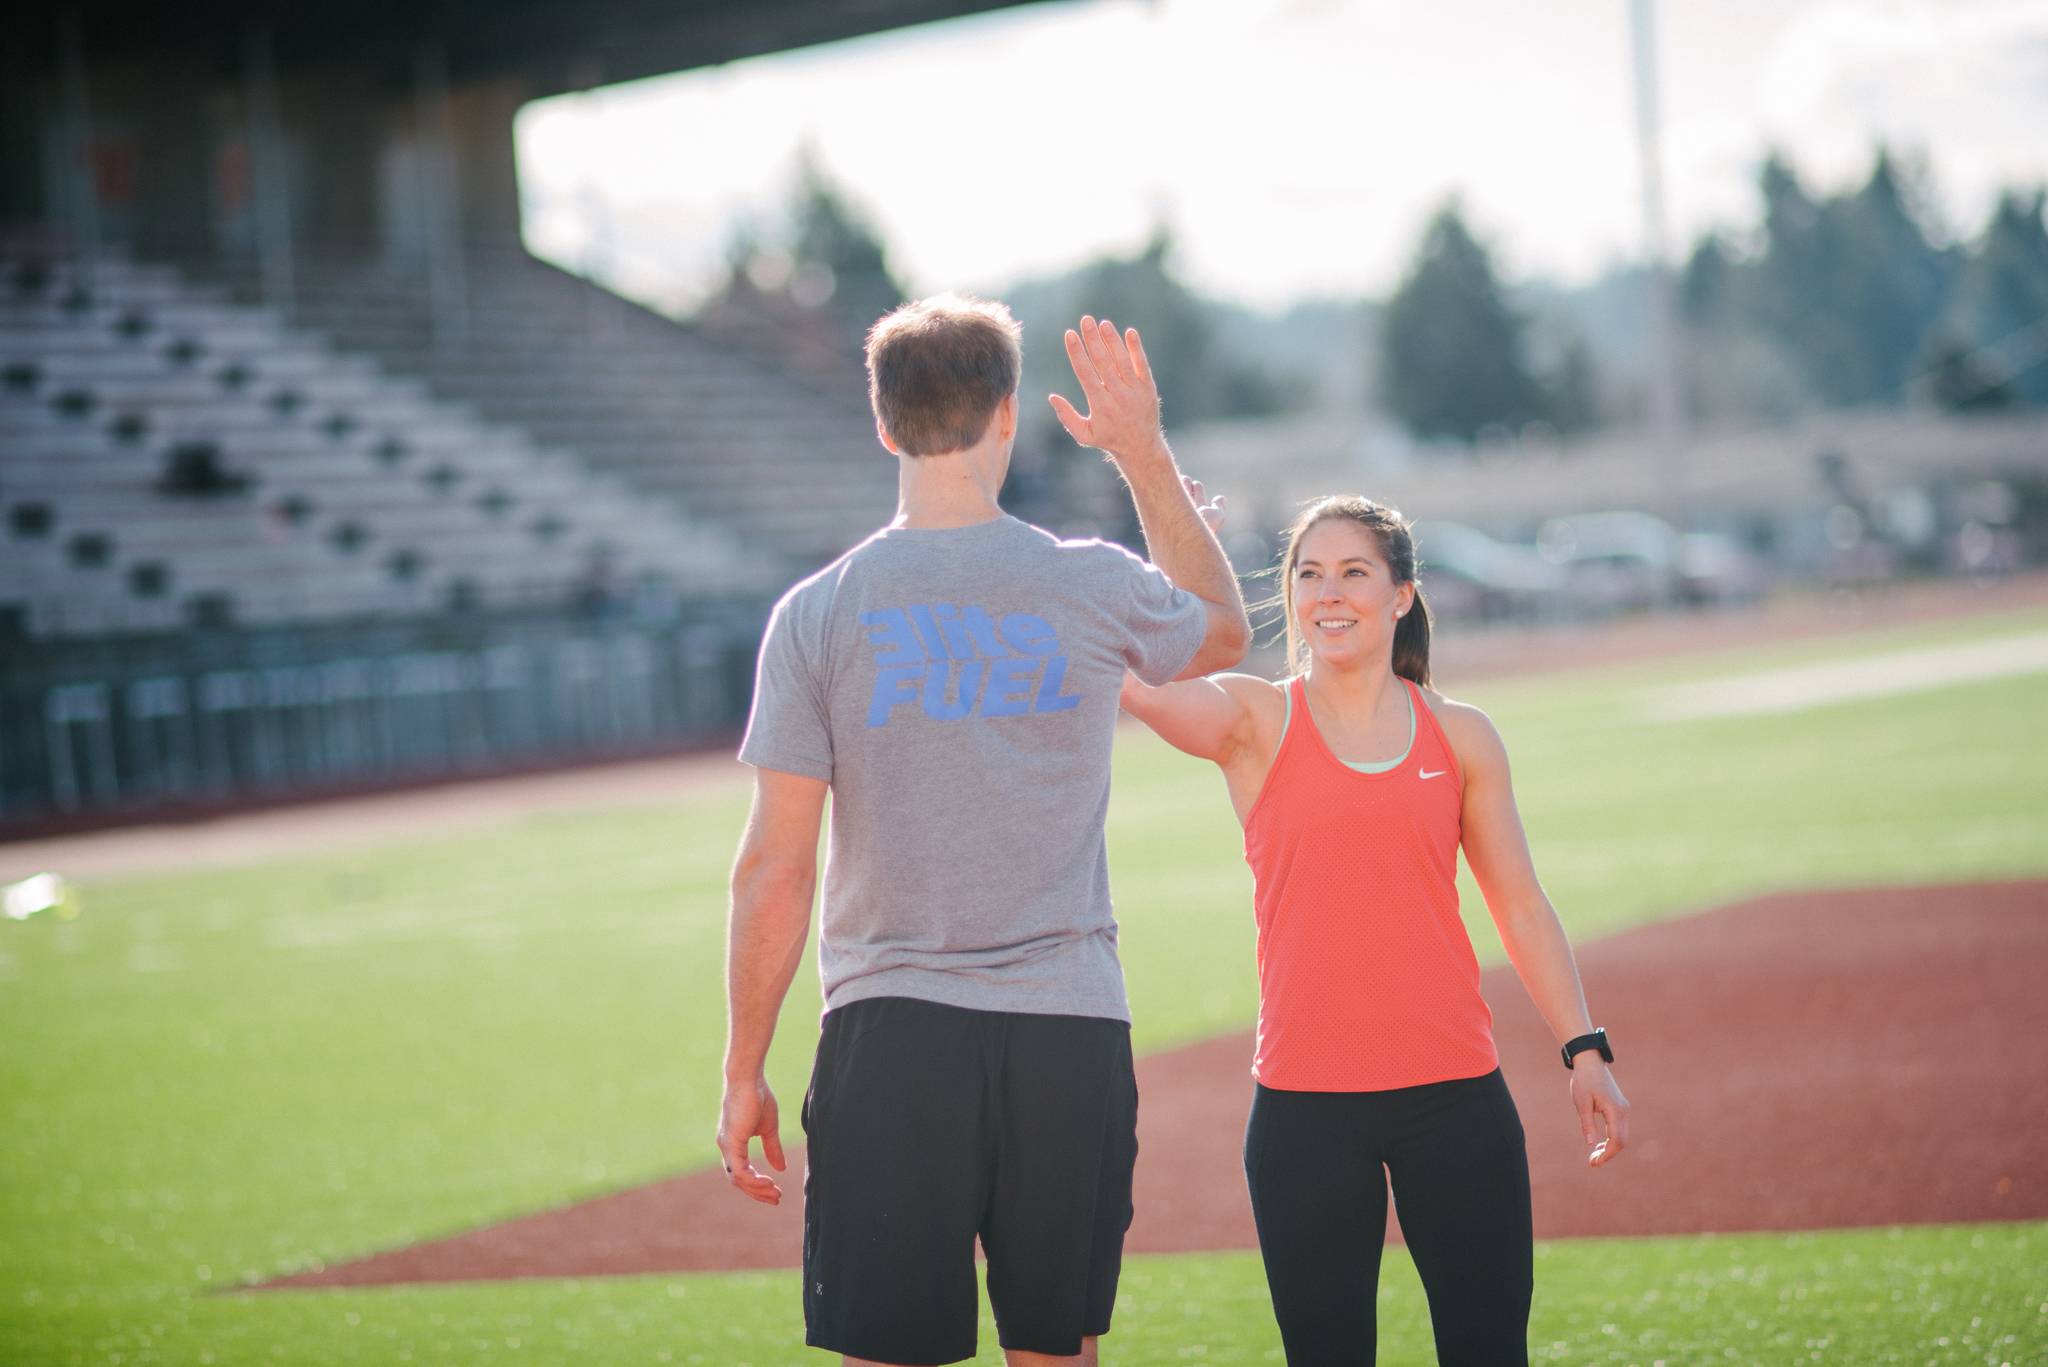 Man giving woman a high five on a track field